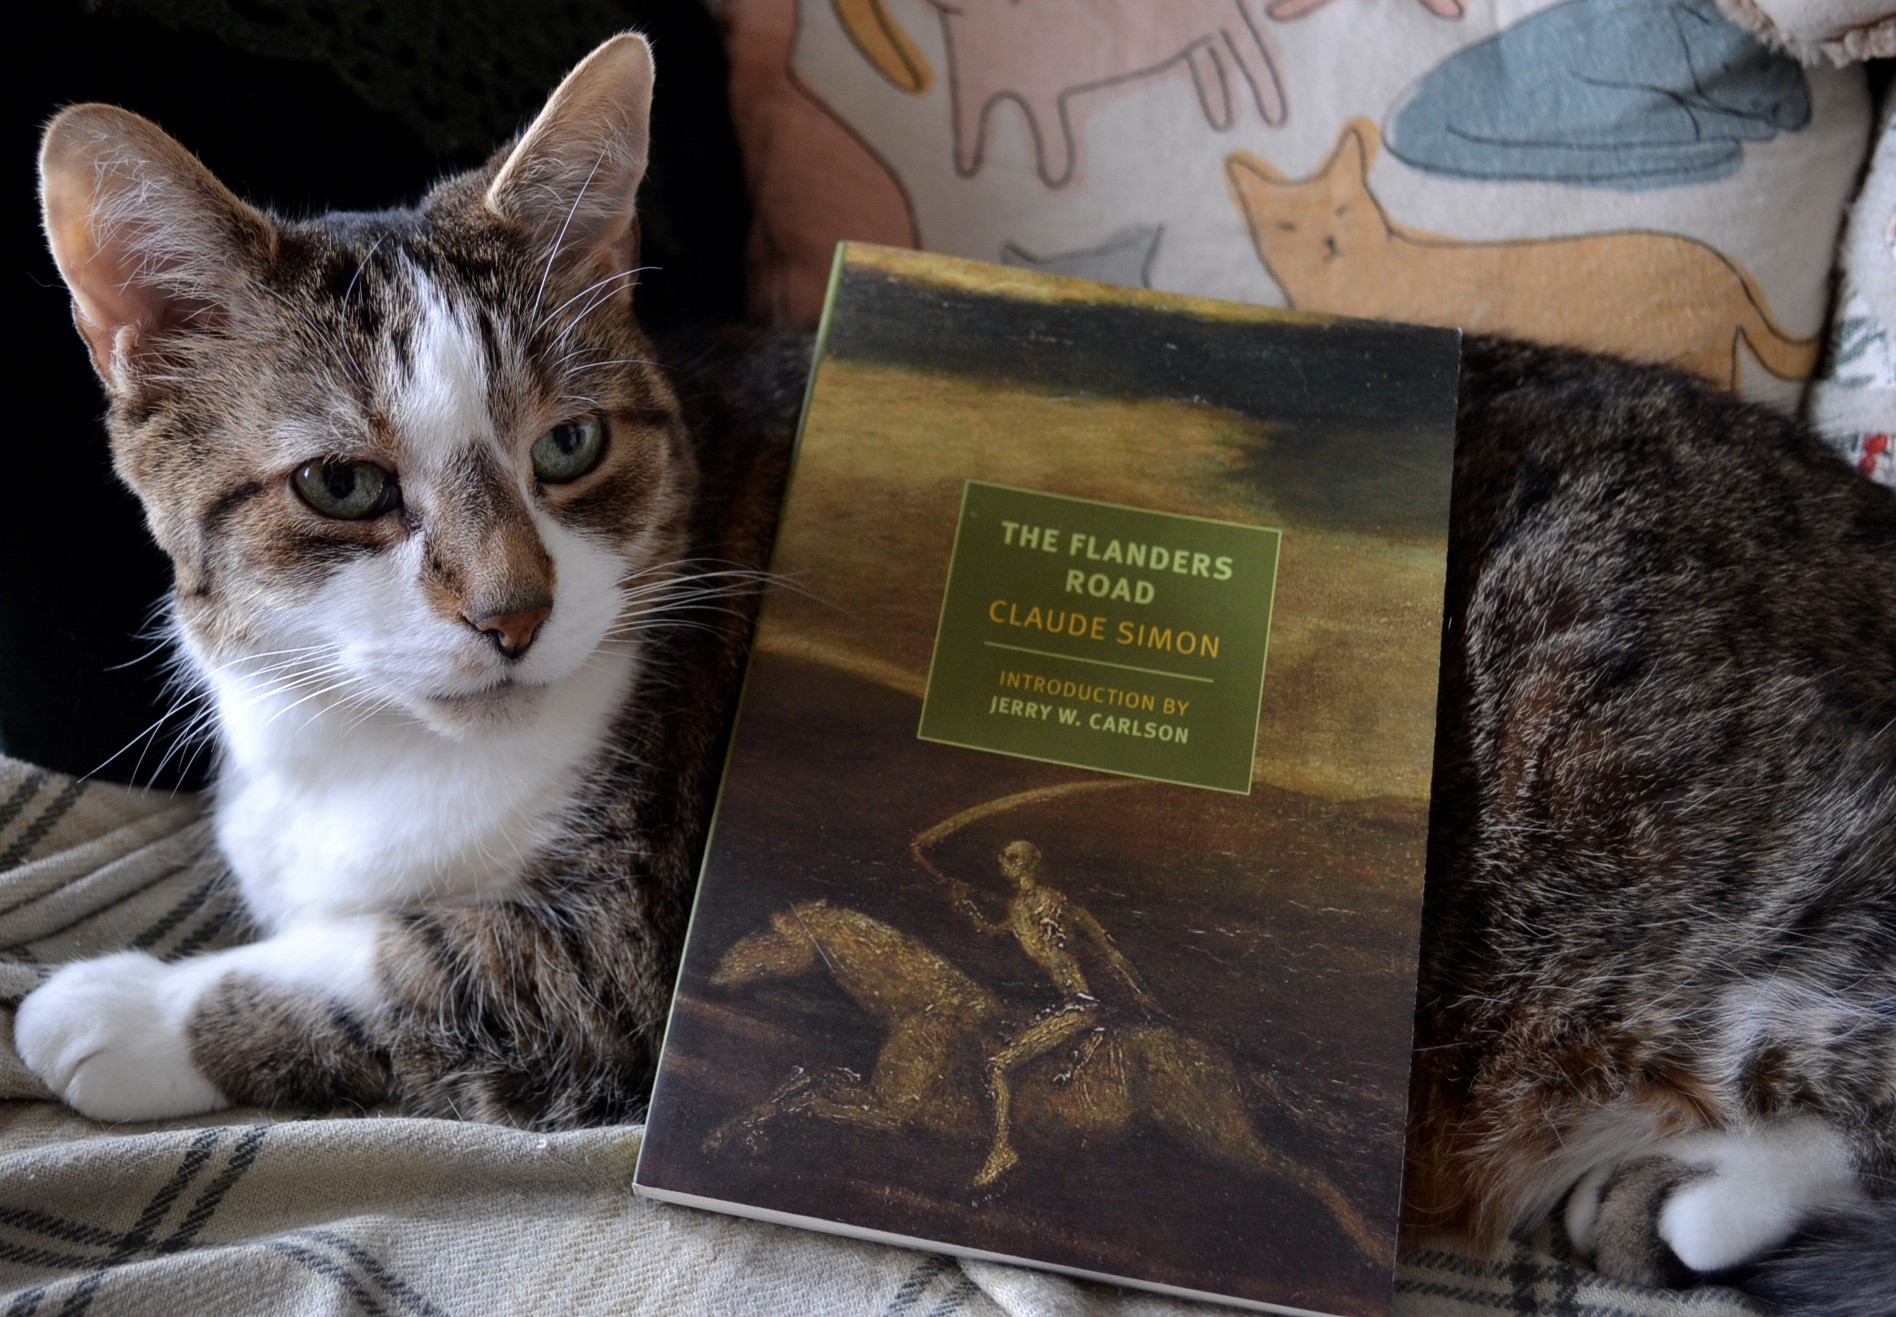 A tabby cat with big ears and a brown nose looks at the book resting against her side.